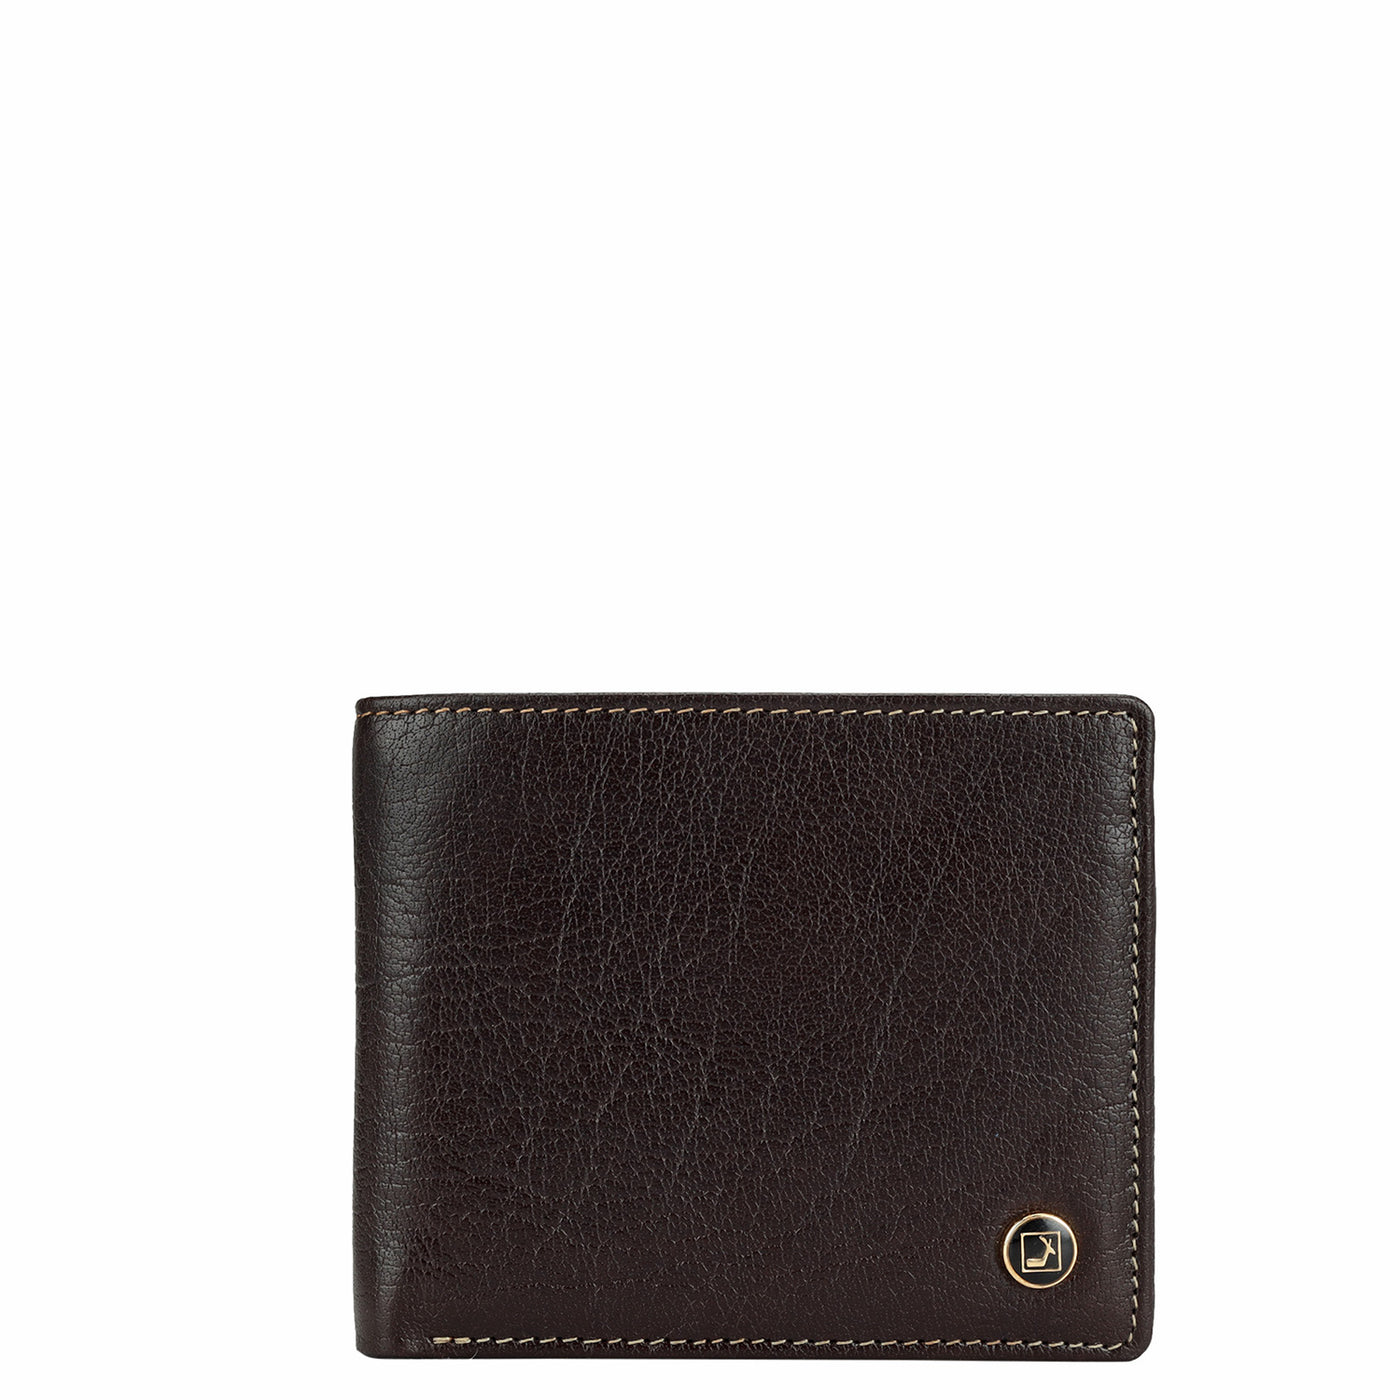 Elephant Pattern Leather Mens Wallet - Chocolate